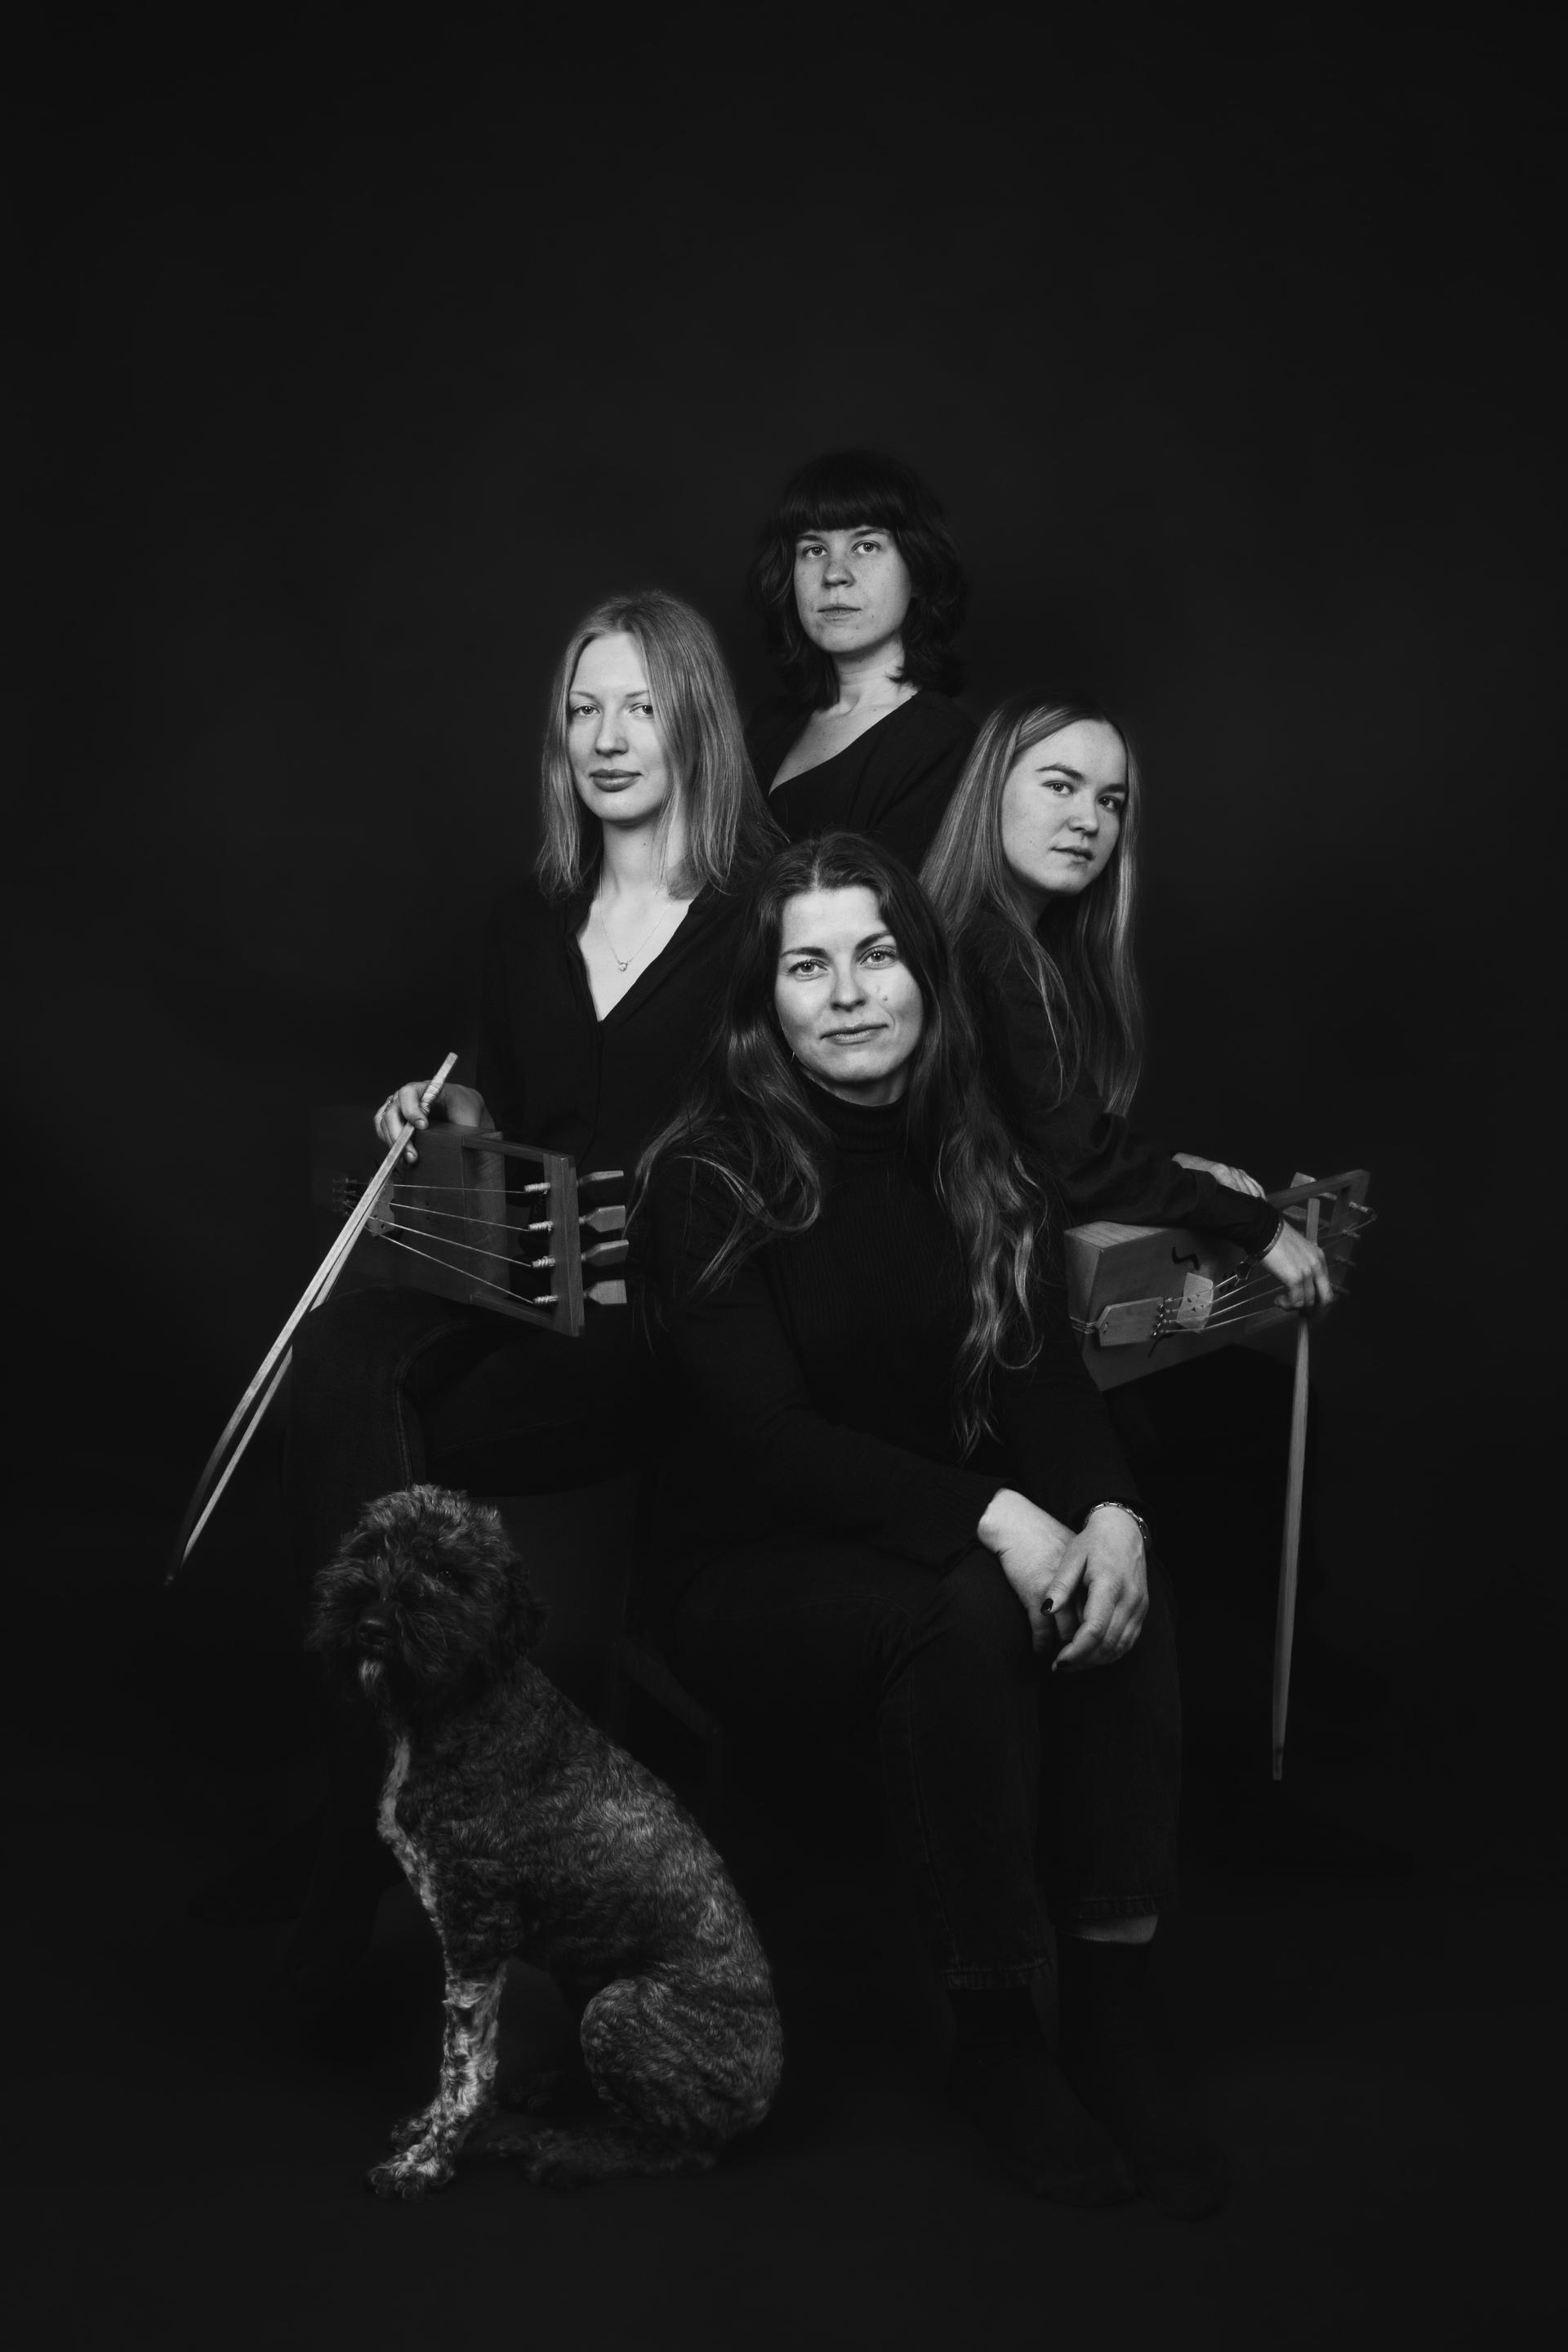 The music group 6hunesseq formed because of their fascination with old Estonian folk hymns, and they are releasing a new album this year.